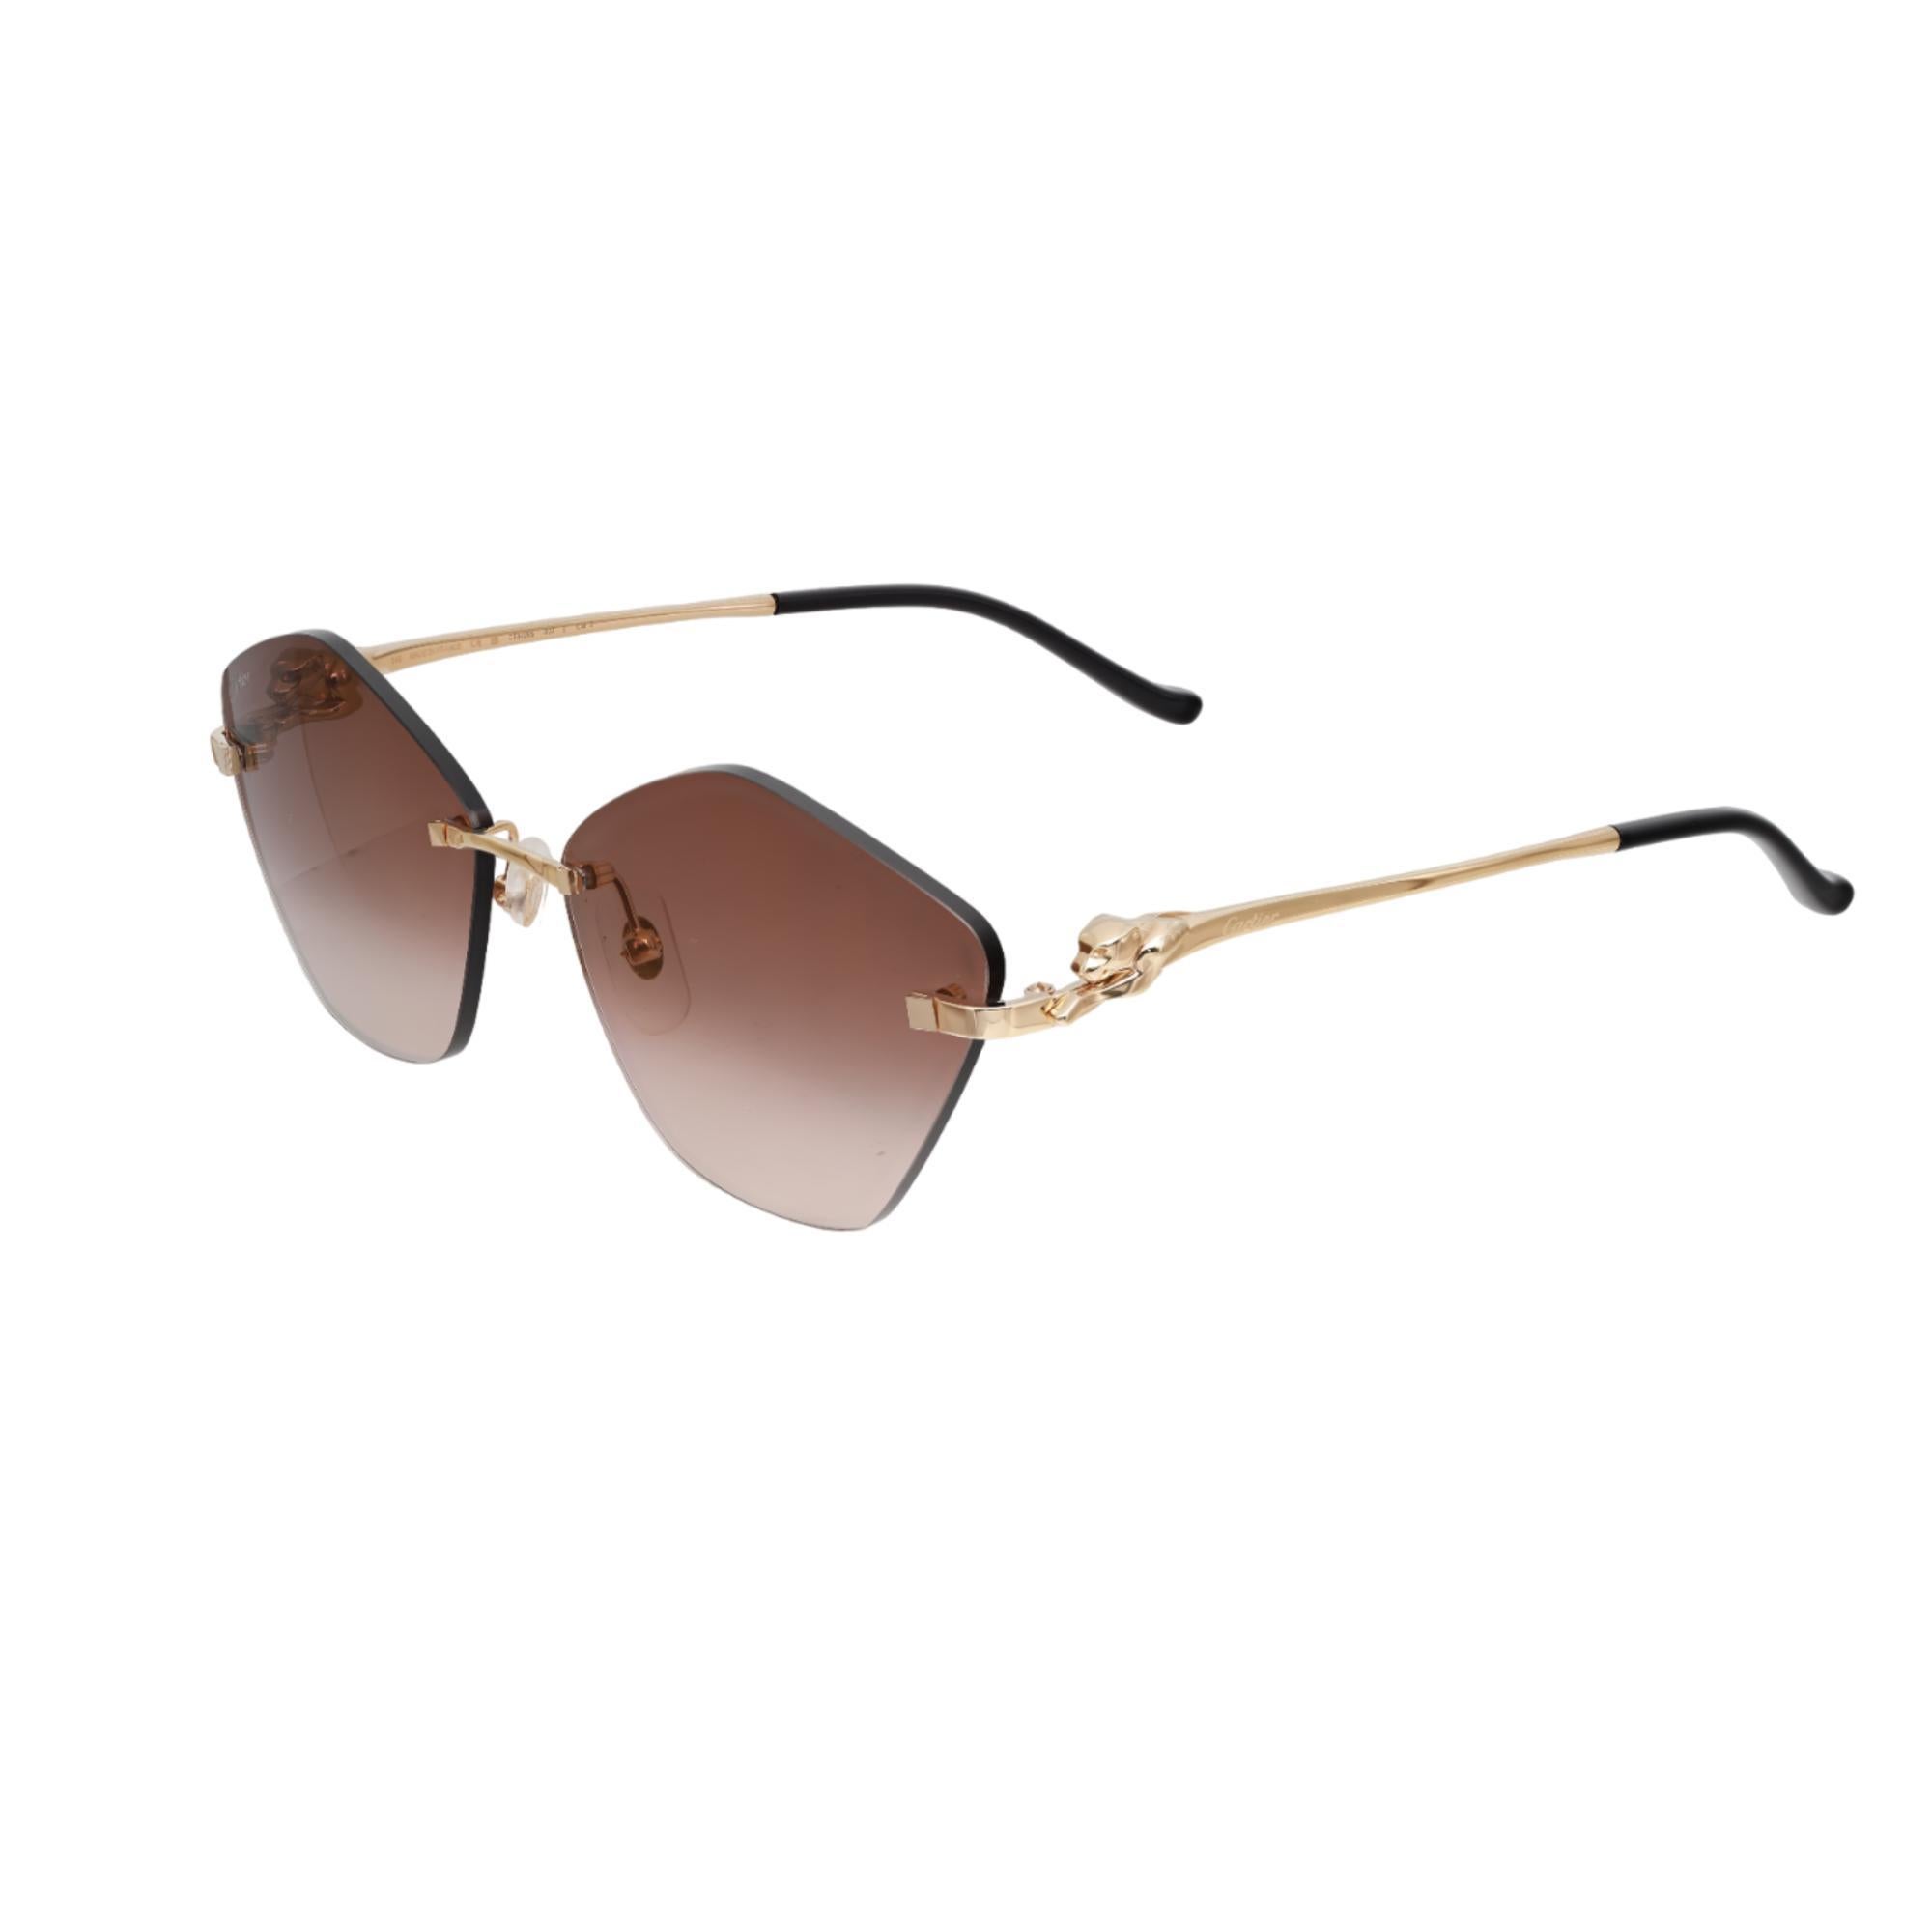 These breathtaking Cartier Panthere De Cartier sunglasses are the epitome of sheer elegance. These sunglasses are crafted in a rimless metal frame with a smooth golden finish for the style-savvy people of today. Showcasing UV-protected plastic cat